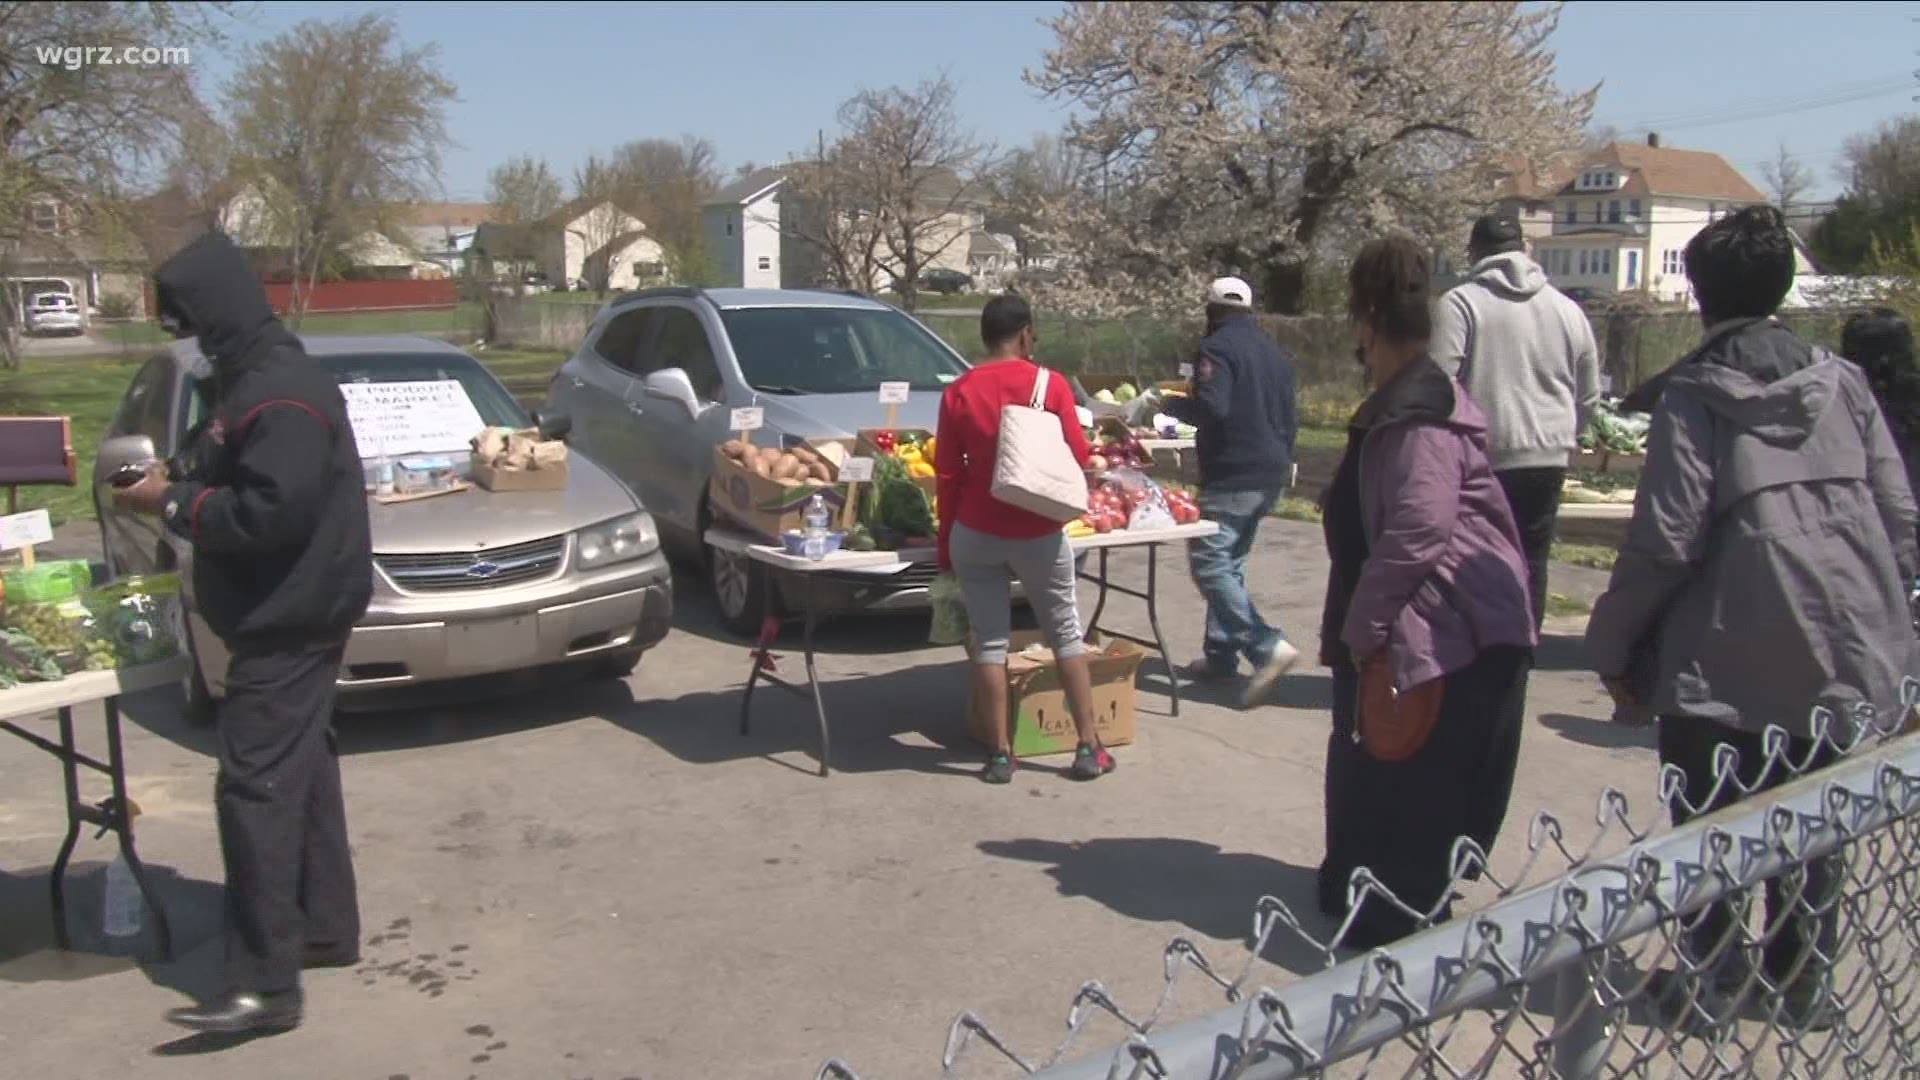 A new farmers market has come to a Lackawanna neighborhood considered to be a food desert.